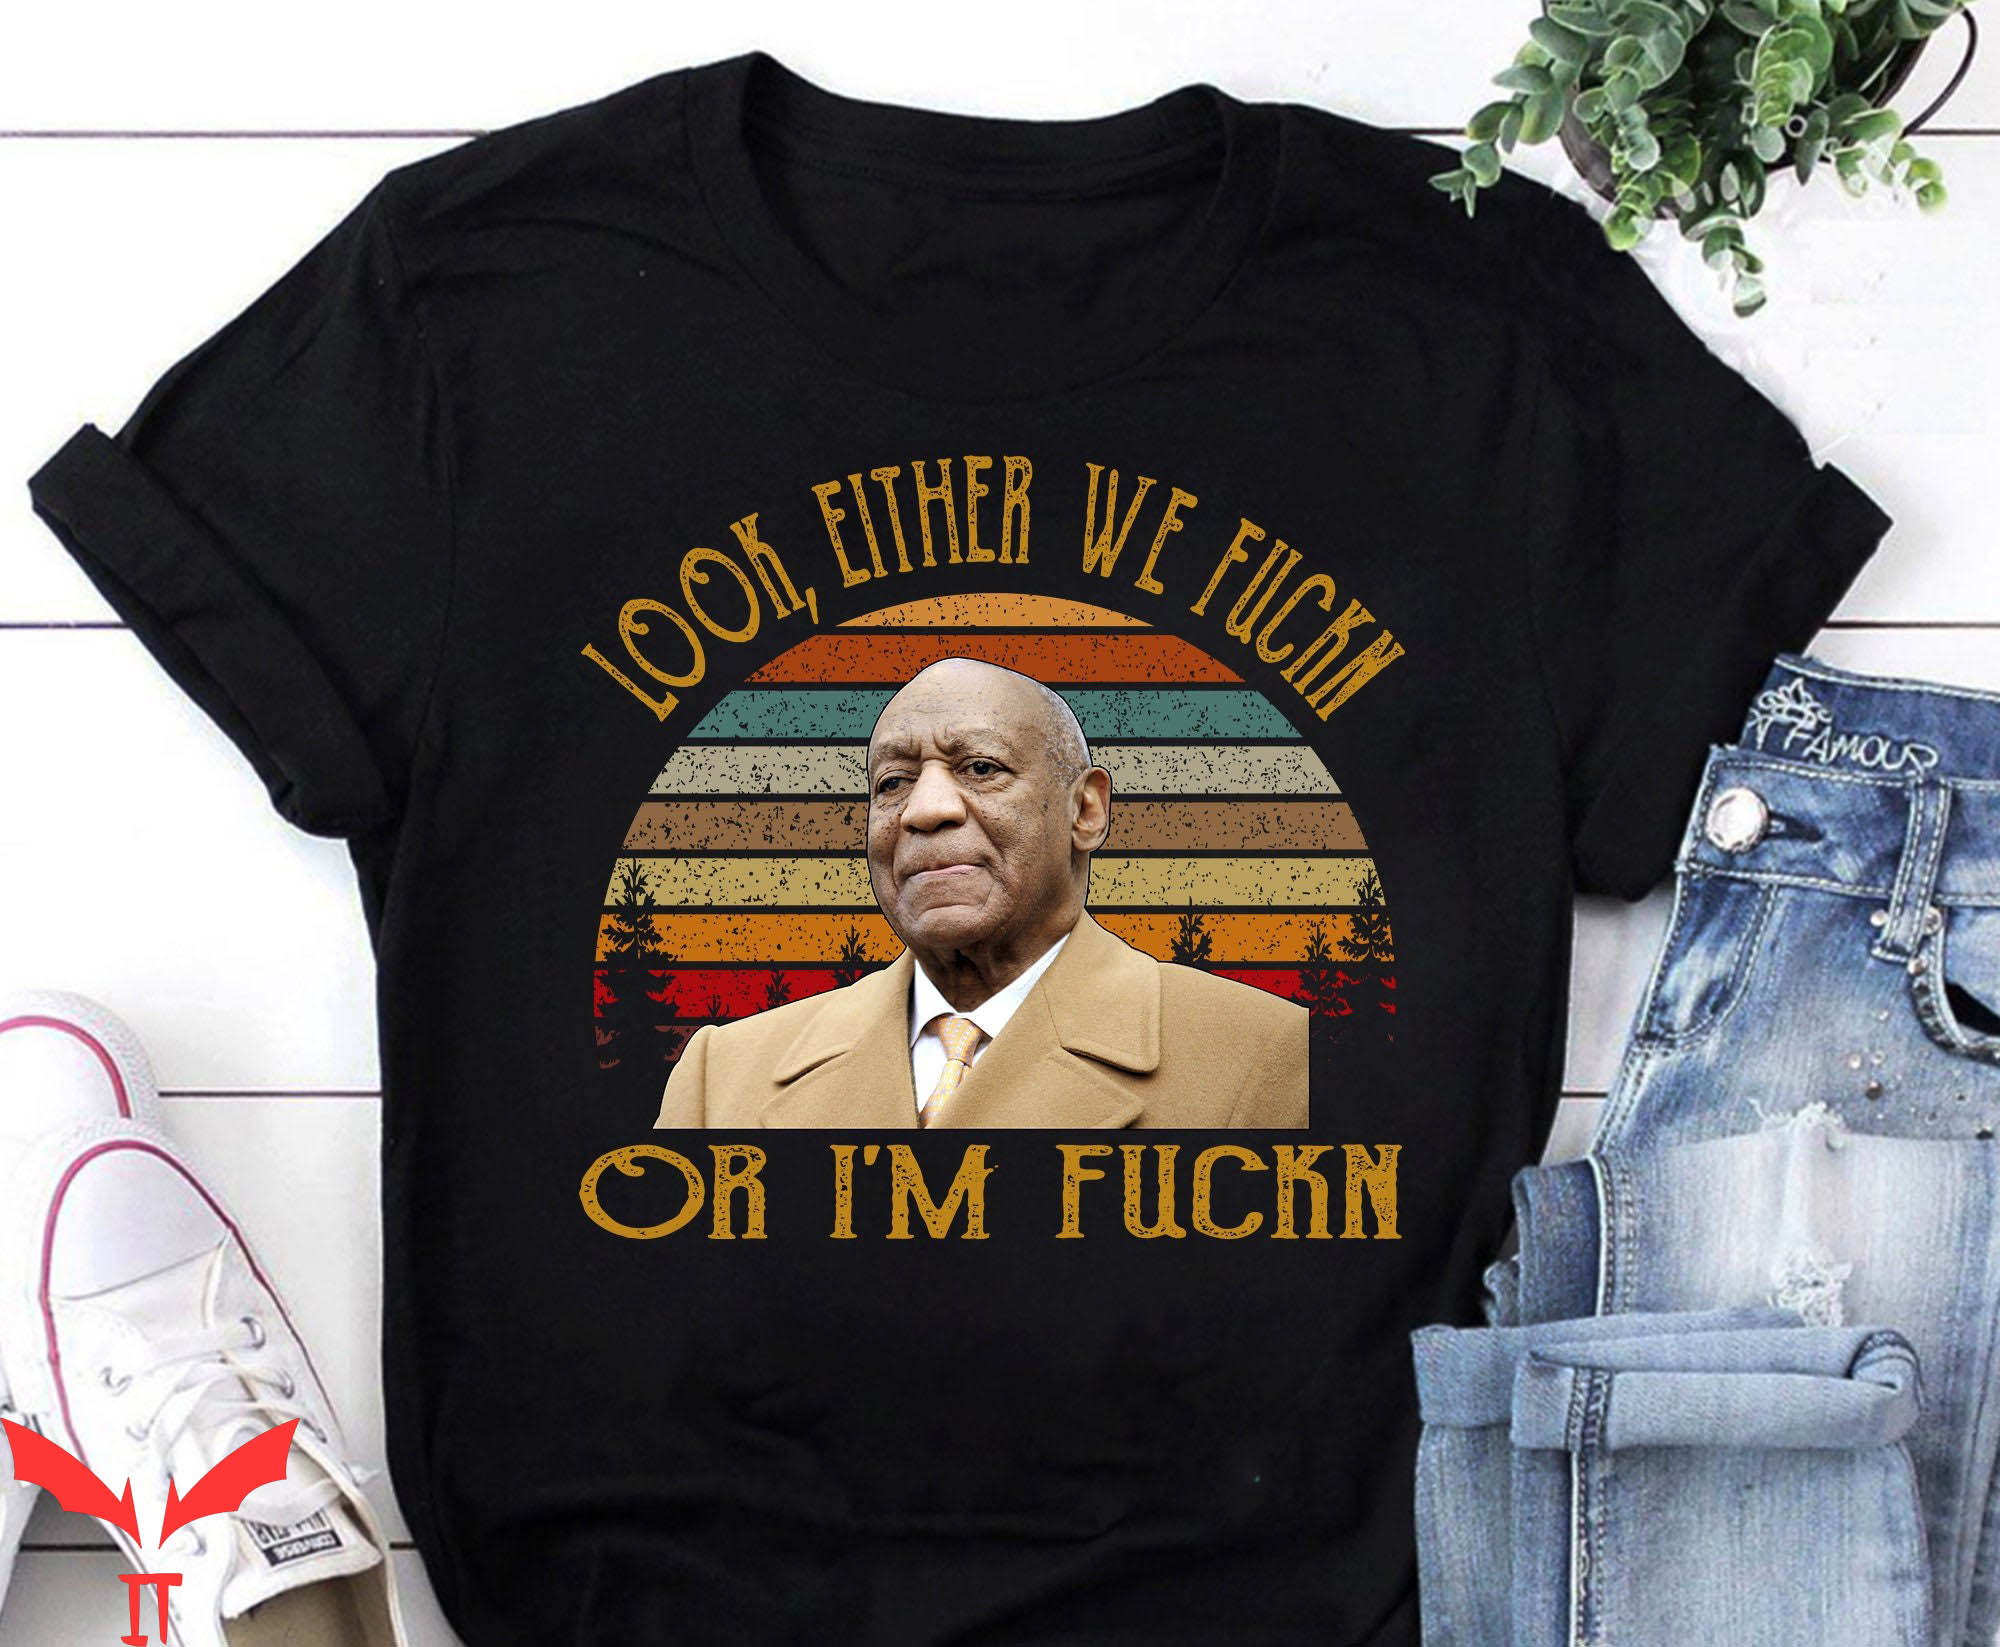 Bill Cosby T-Shirt Look Either We Fuckn Or I'm Fuckn Vintage